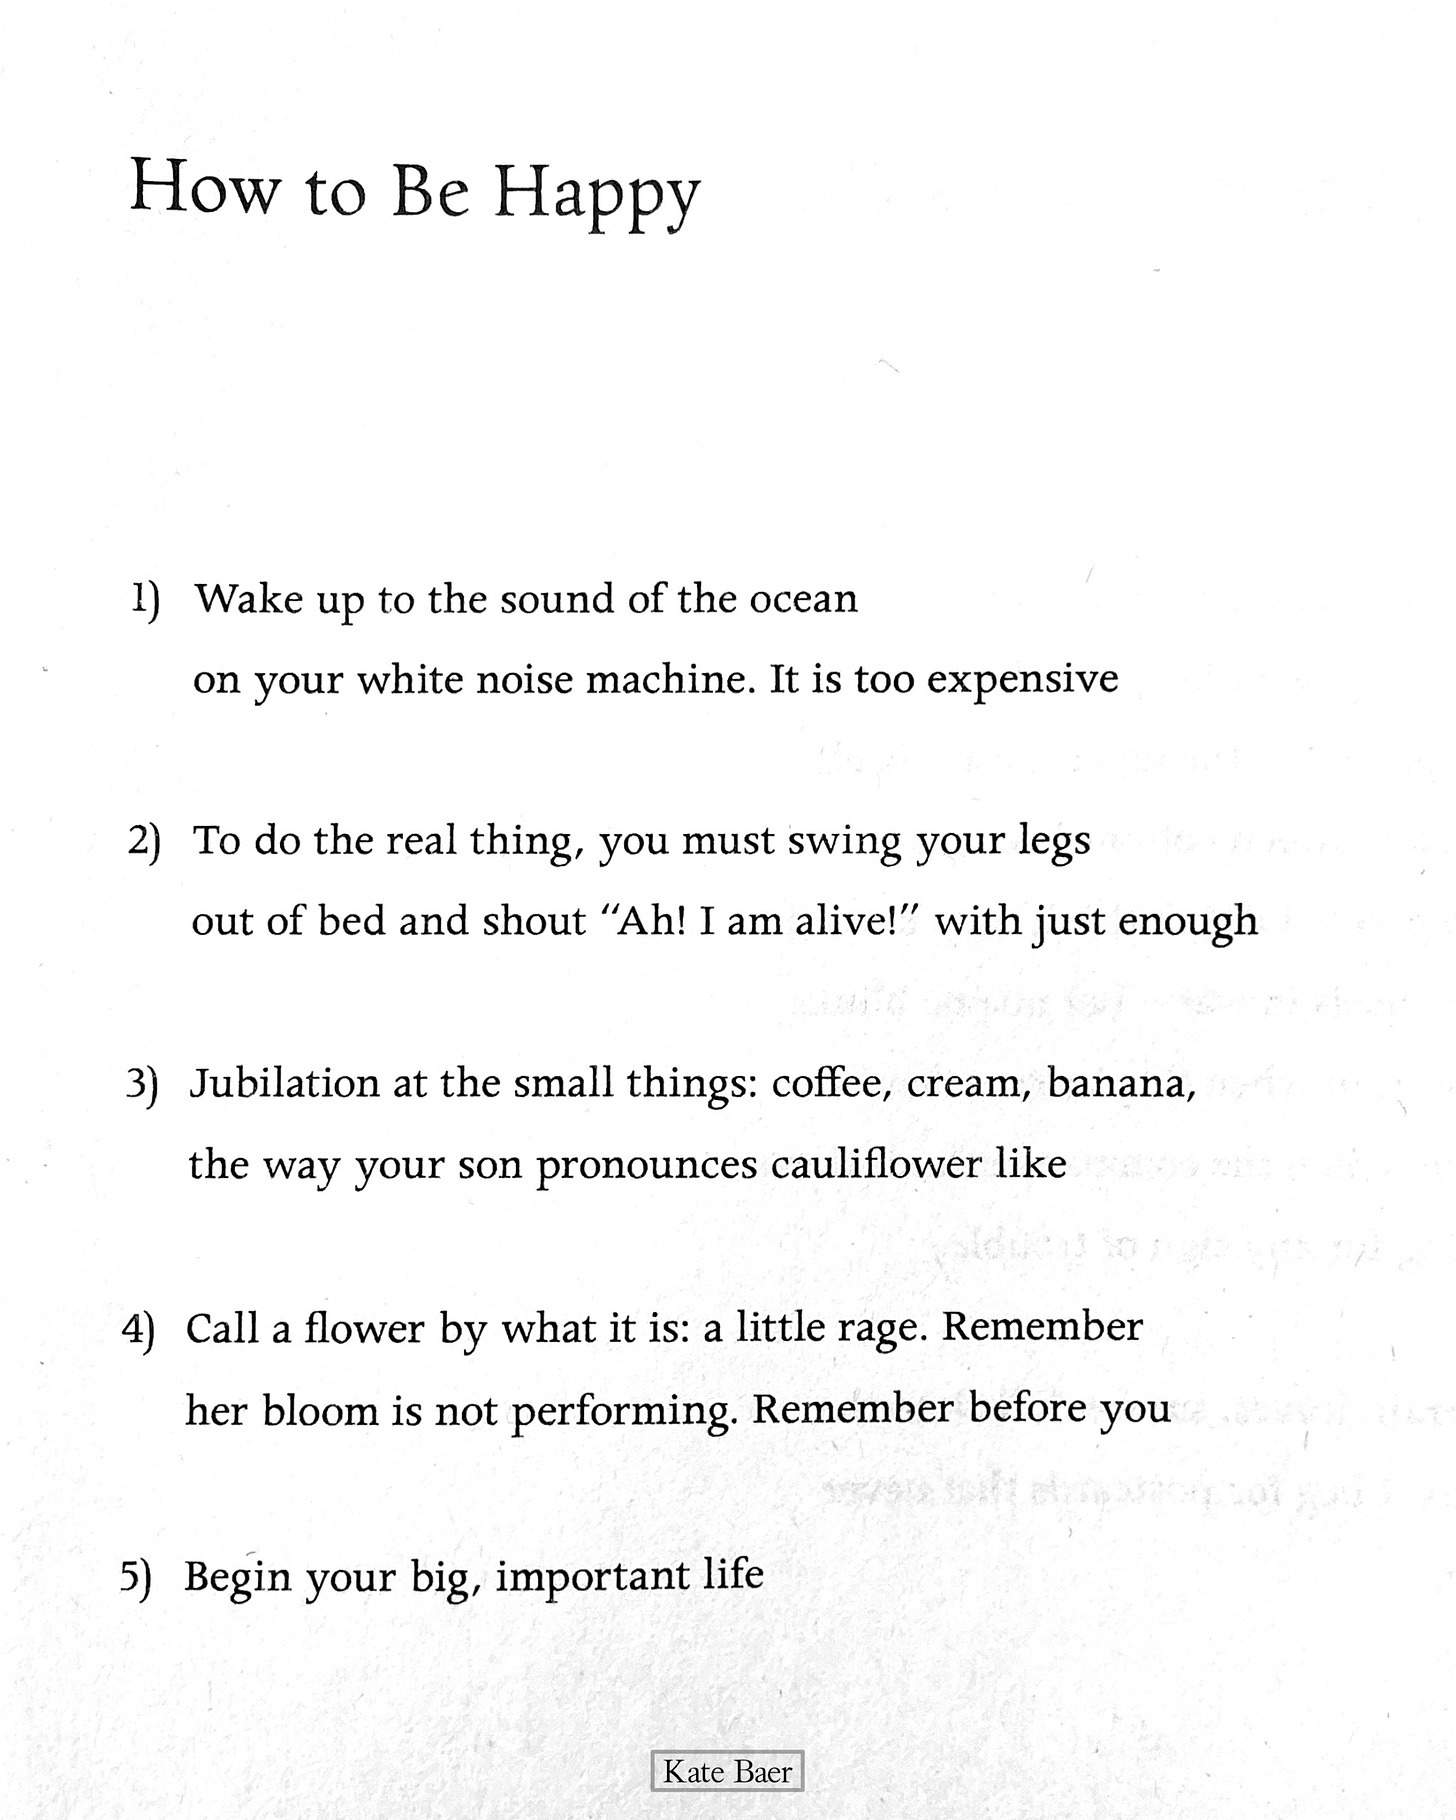 How to Be Happy by Kate Baer